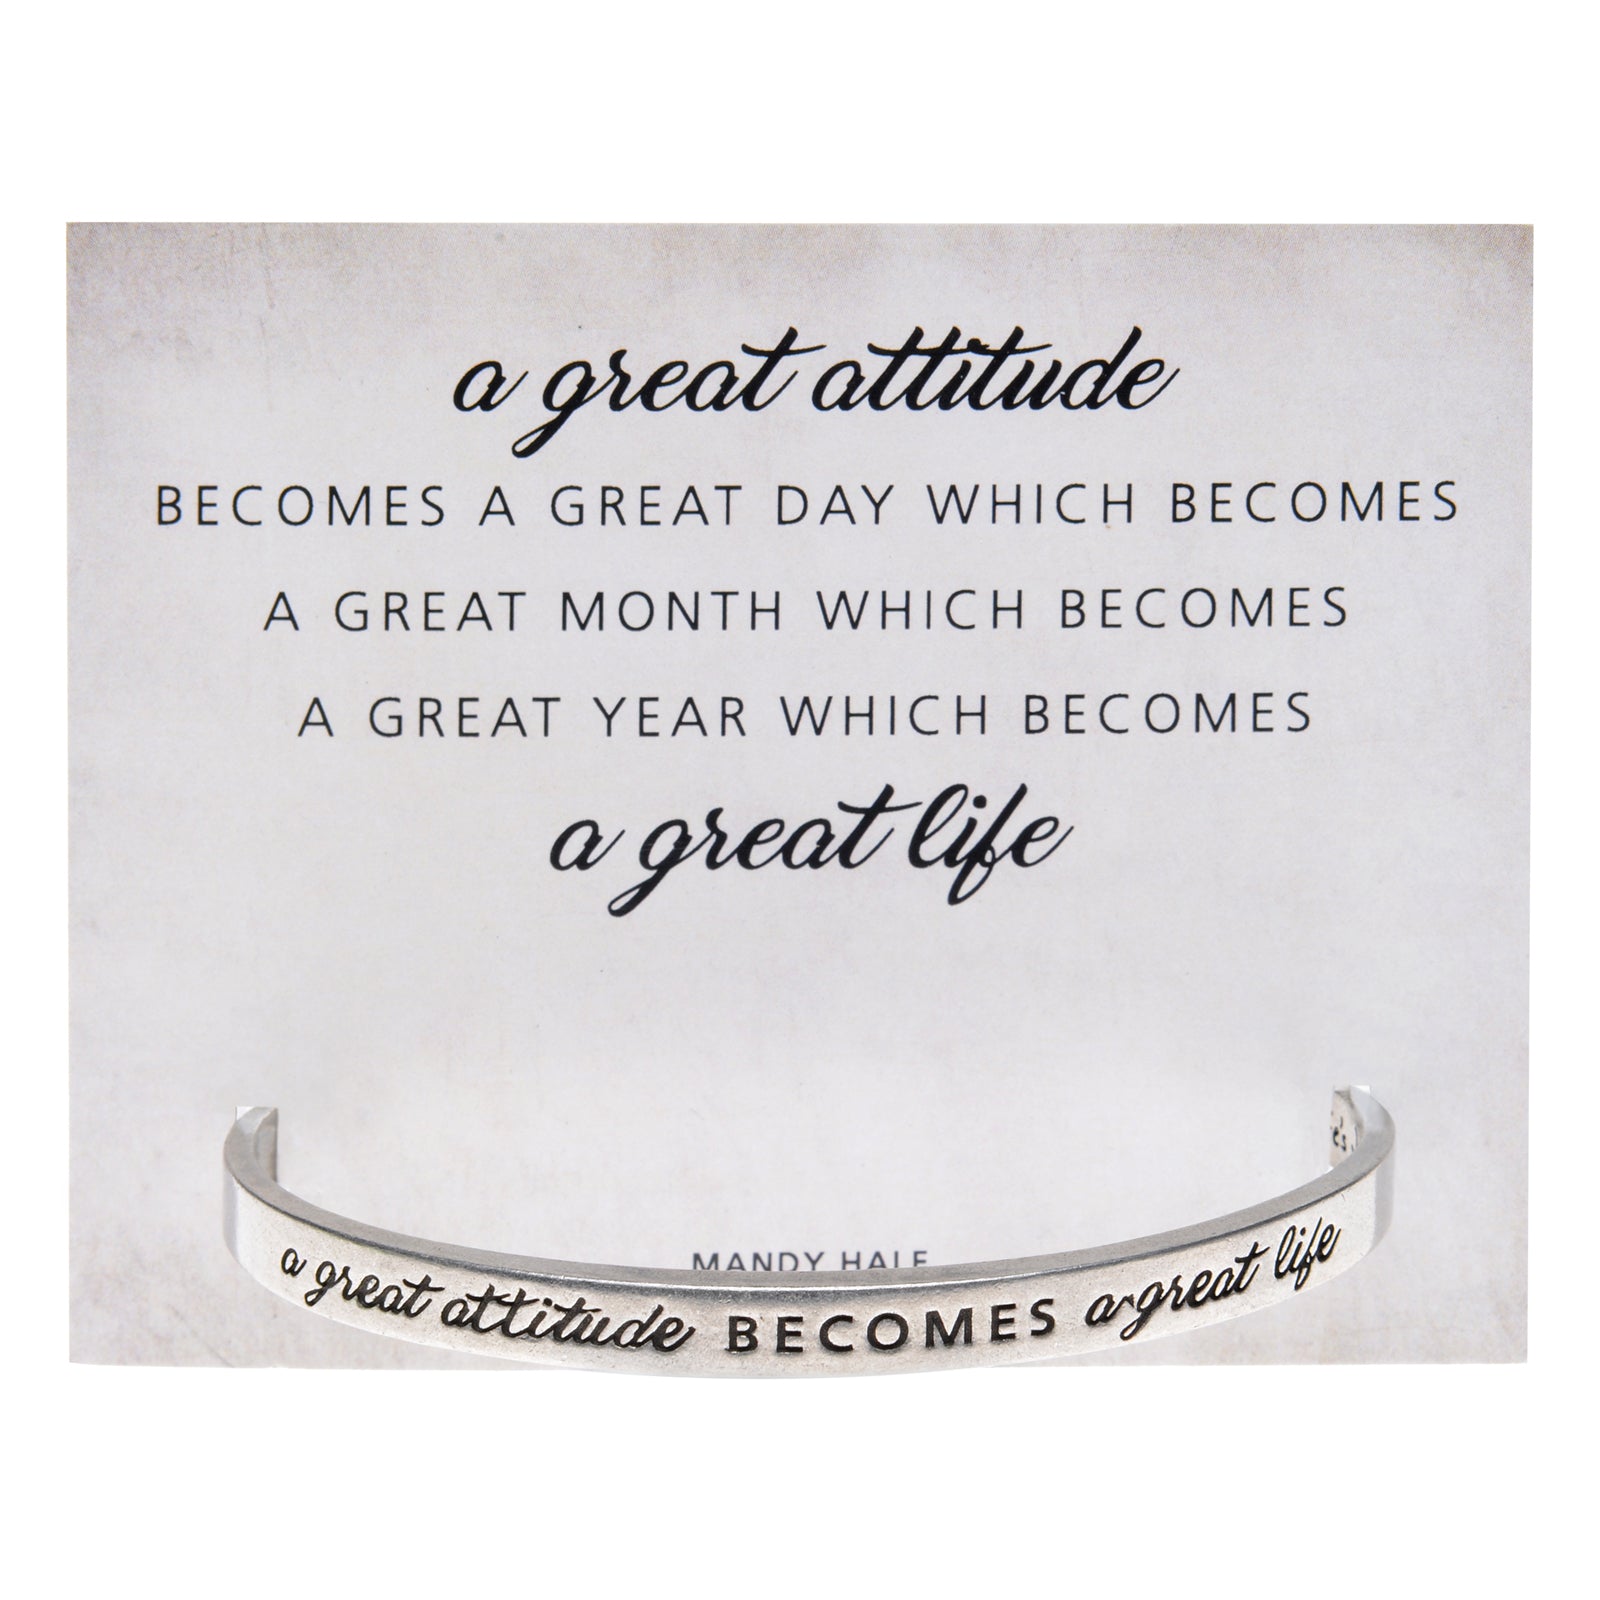 A Great Attitude Becomes a Great Life Quotable Cuff Bracelet on backer card